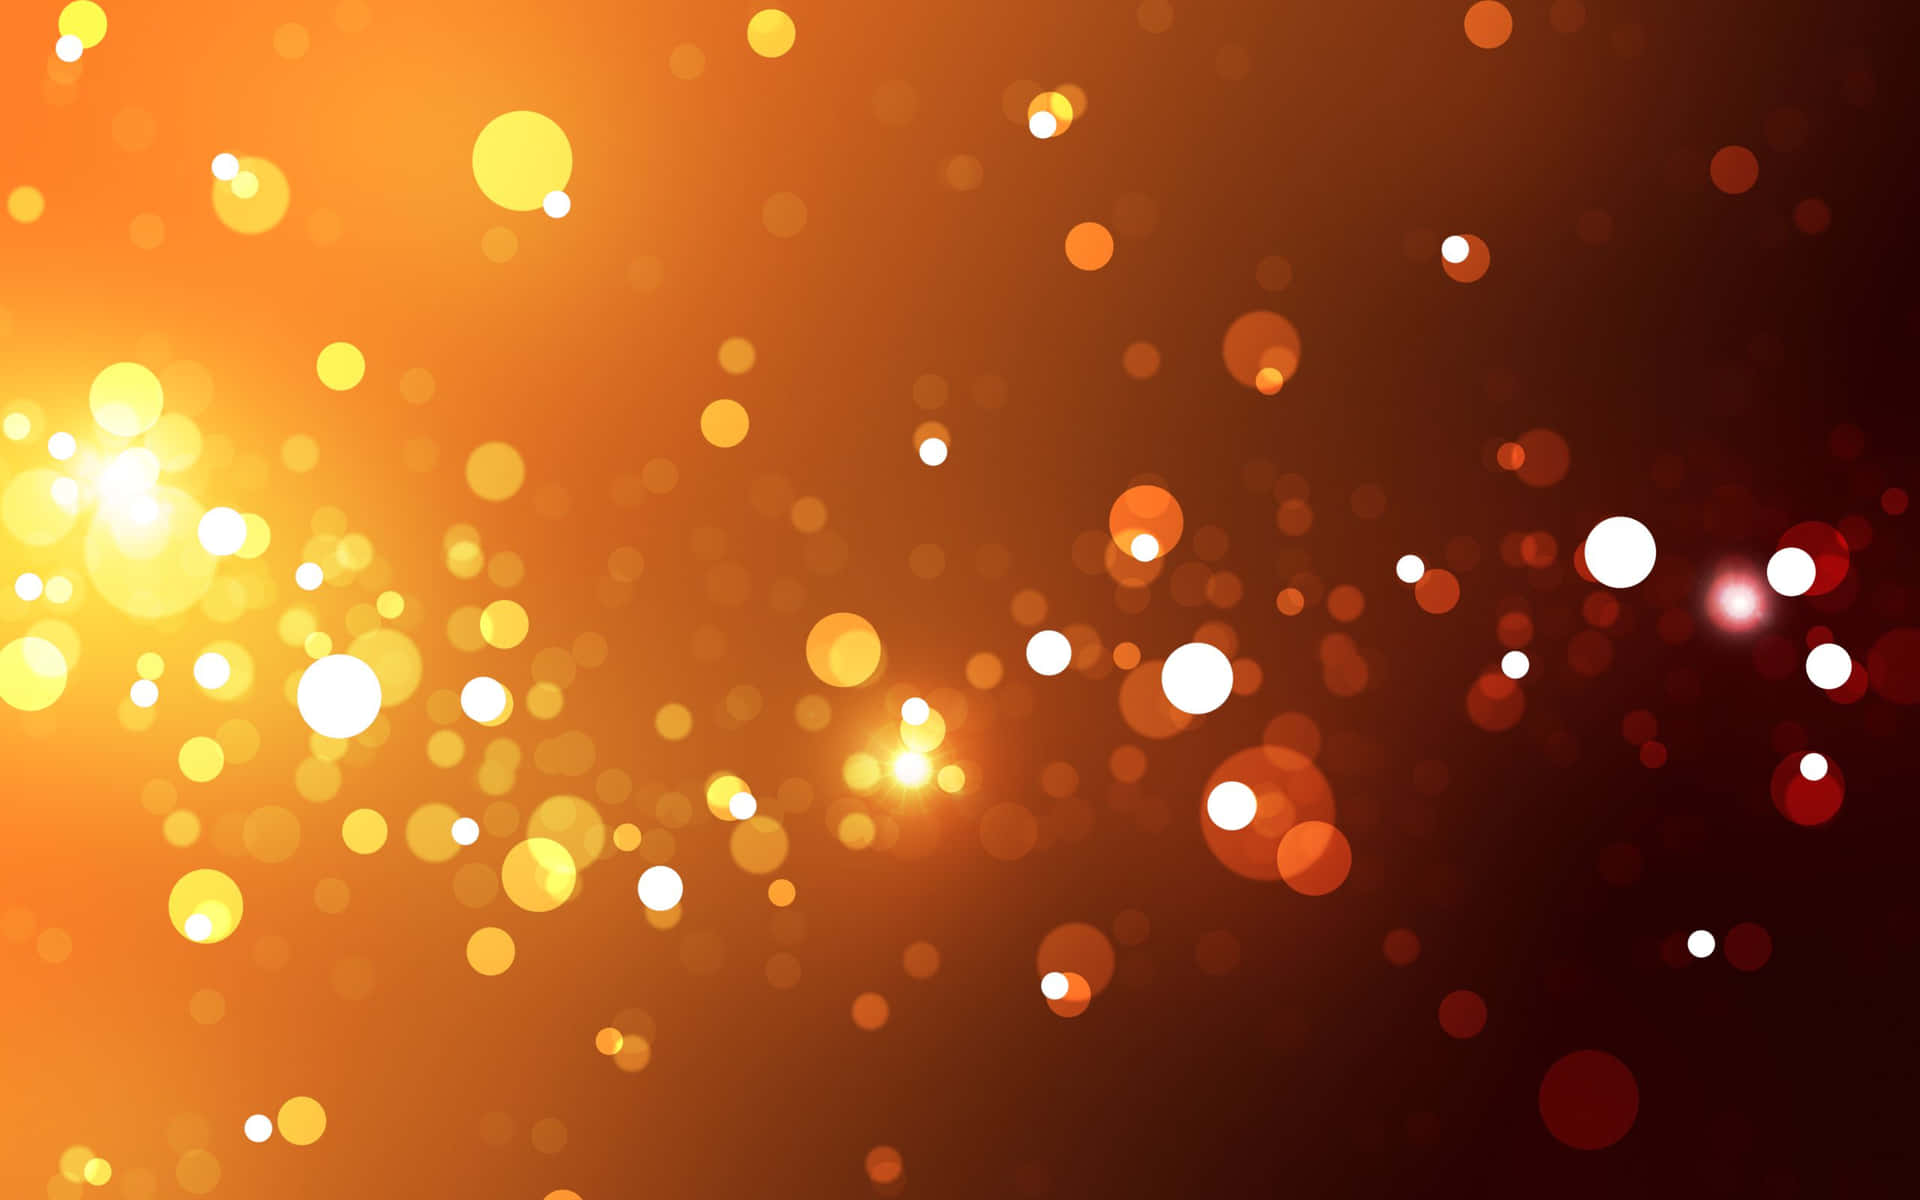 Brighten up your day with this light orange background! Wallpaper